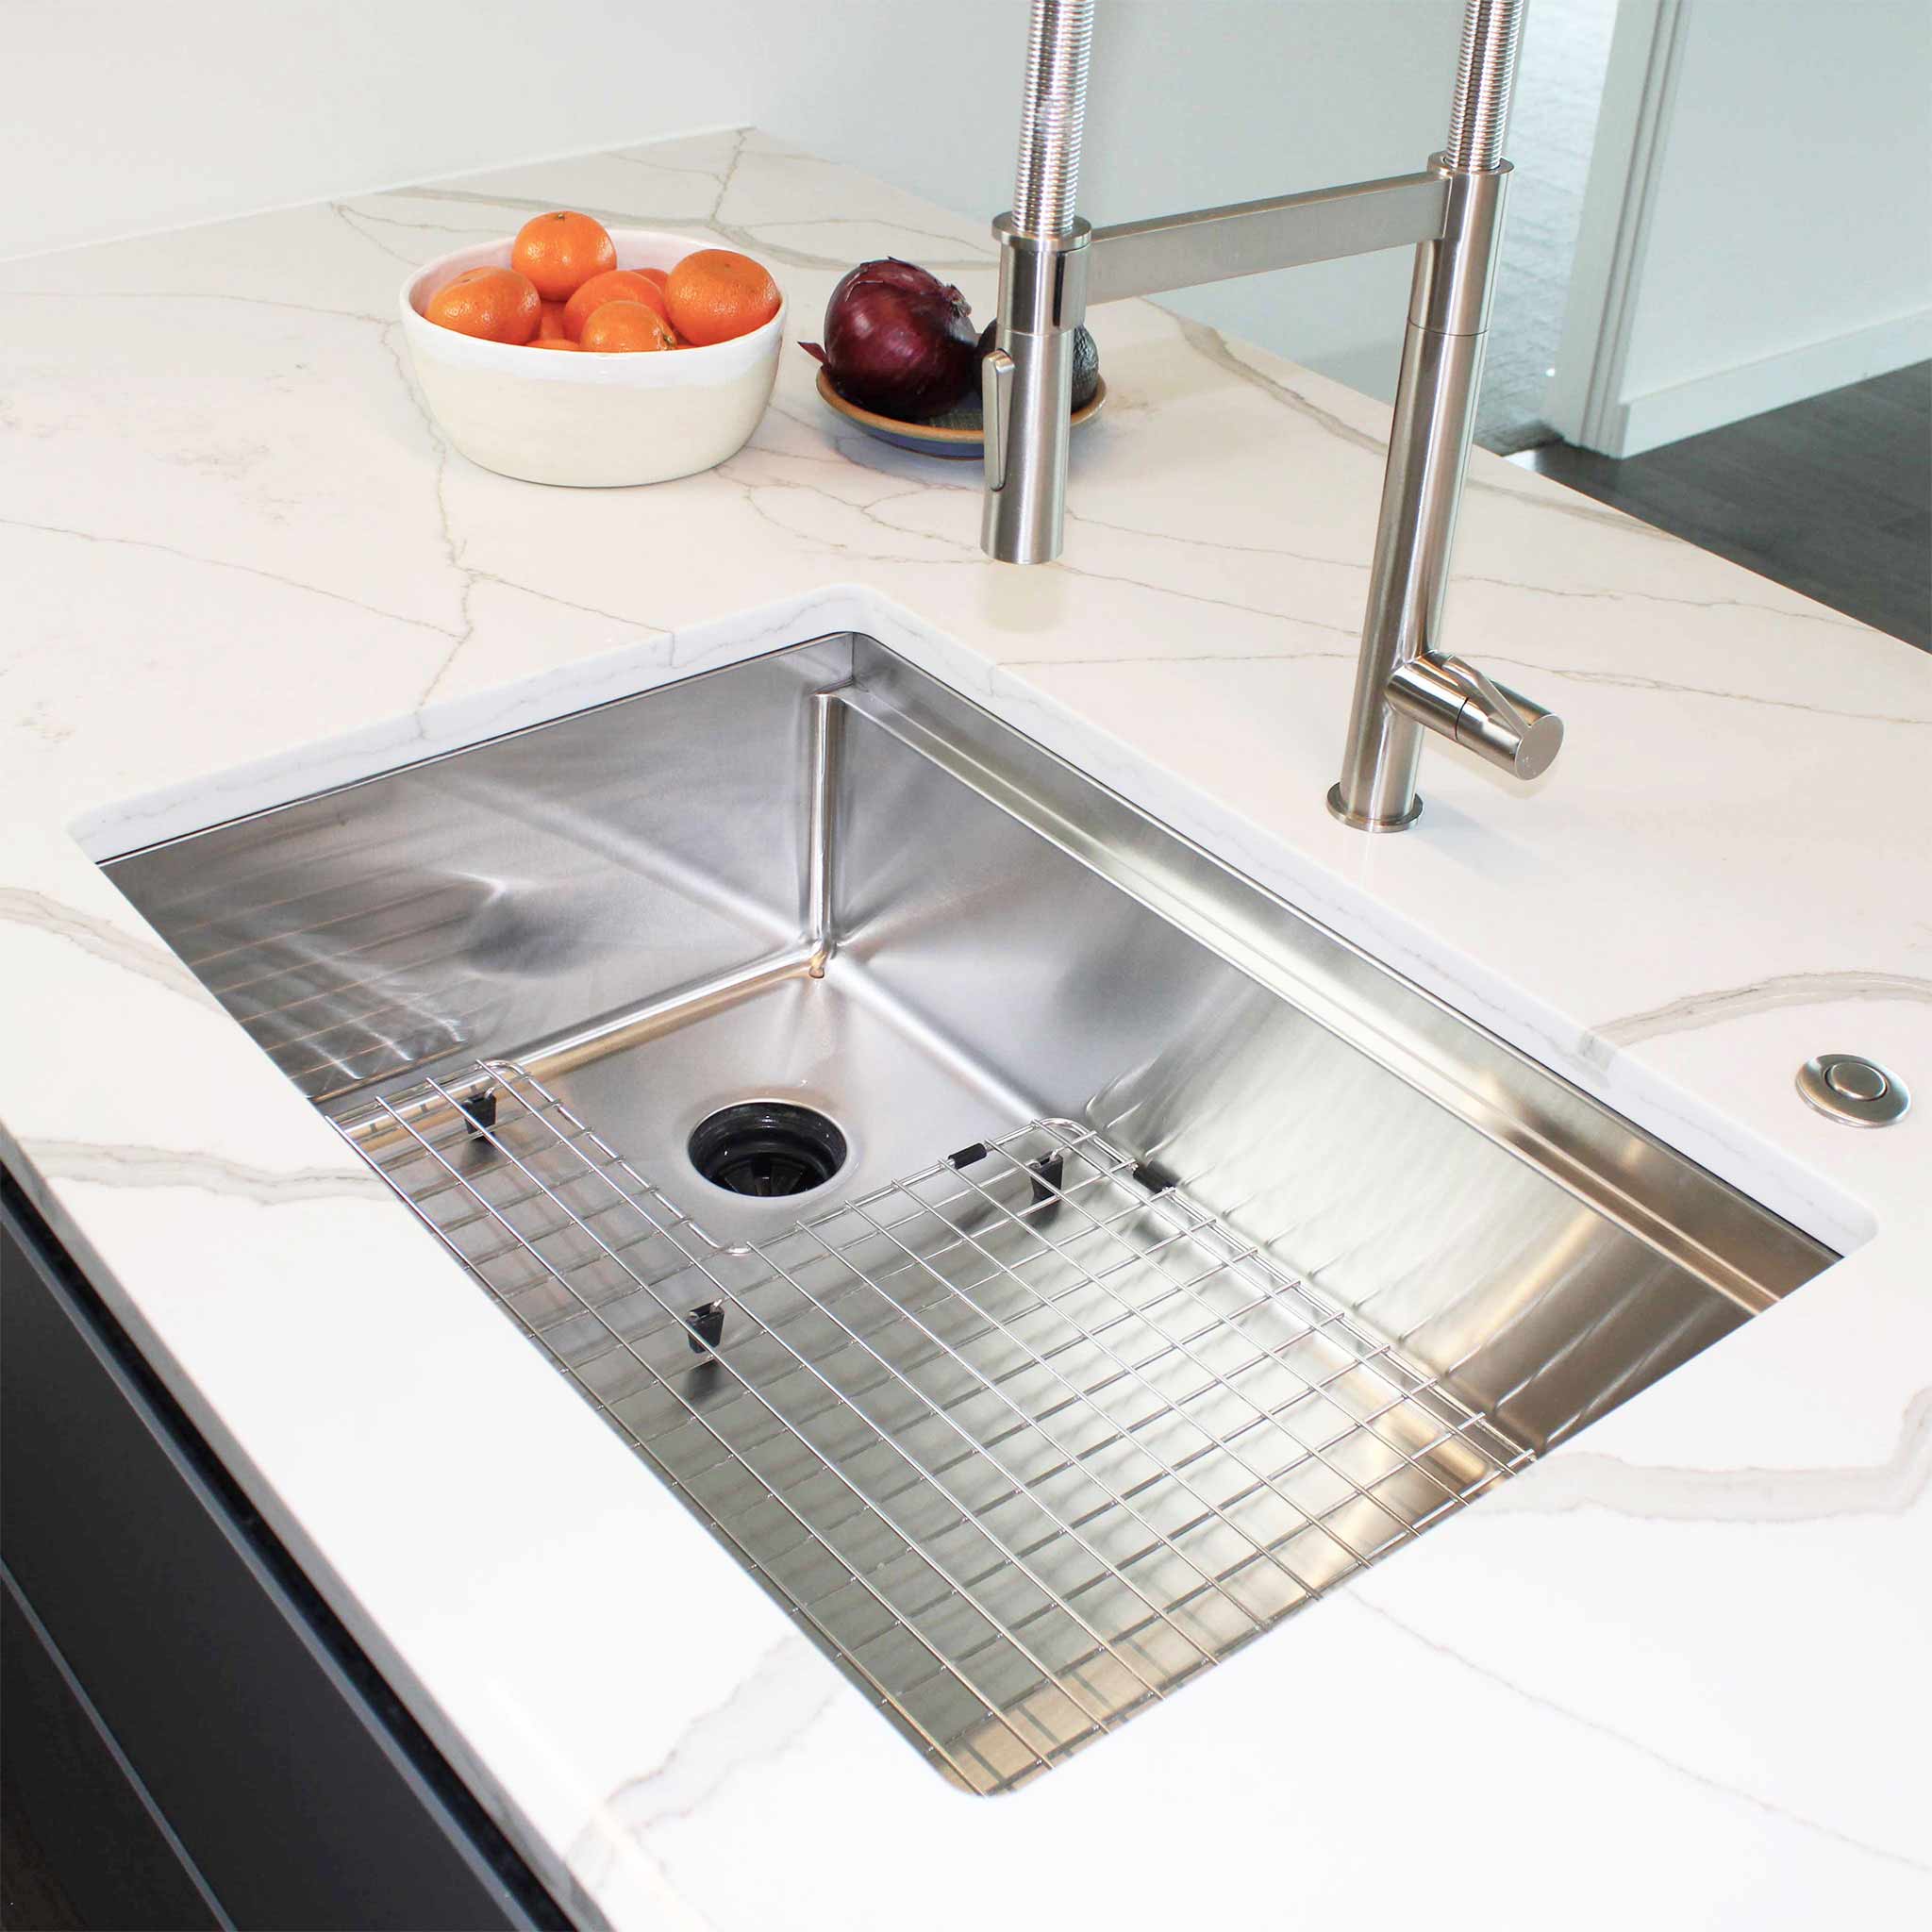 Client photo of the 28” workstation kitchen sink, made with stainless steel and a left offset drain and a seamless drain design.